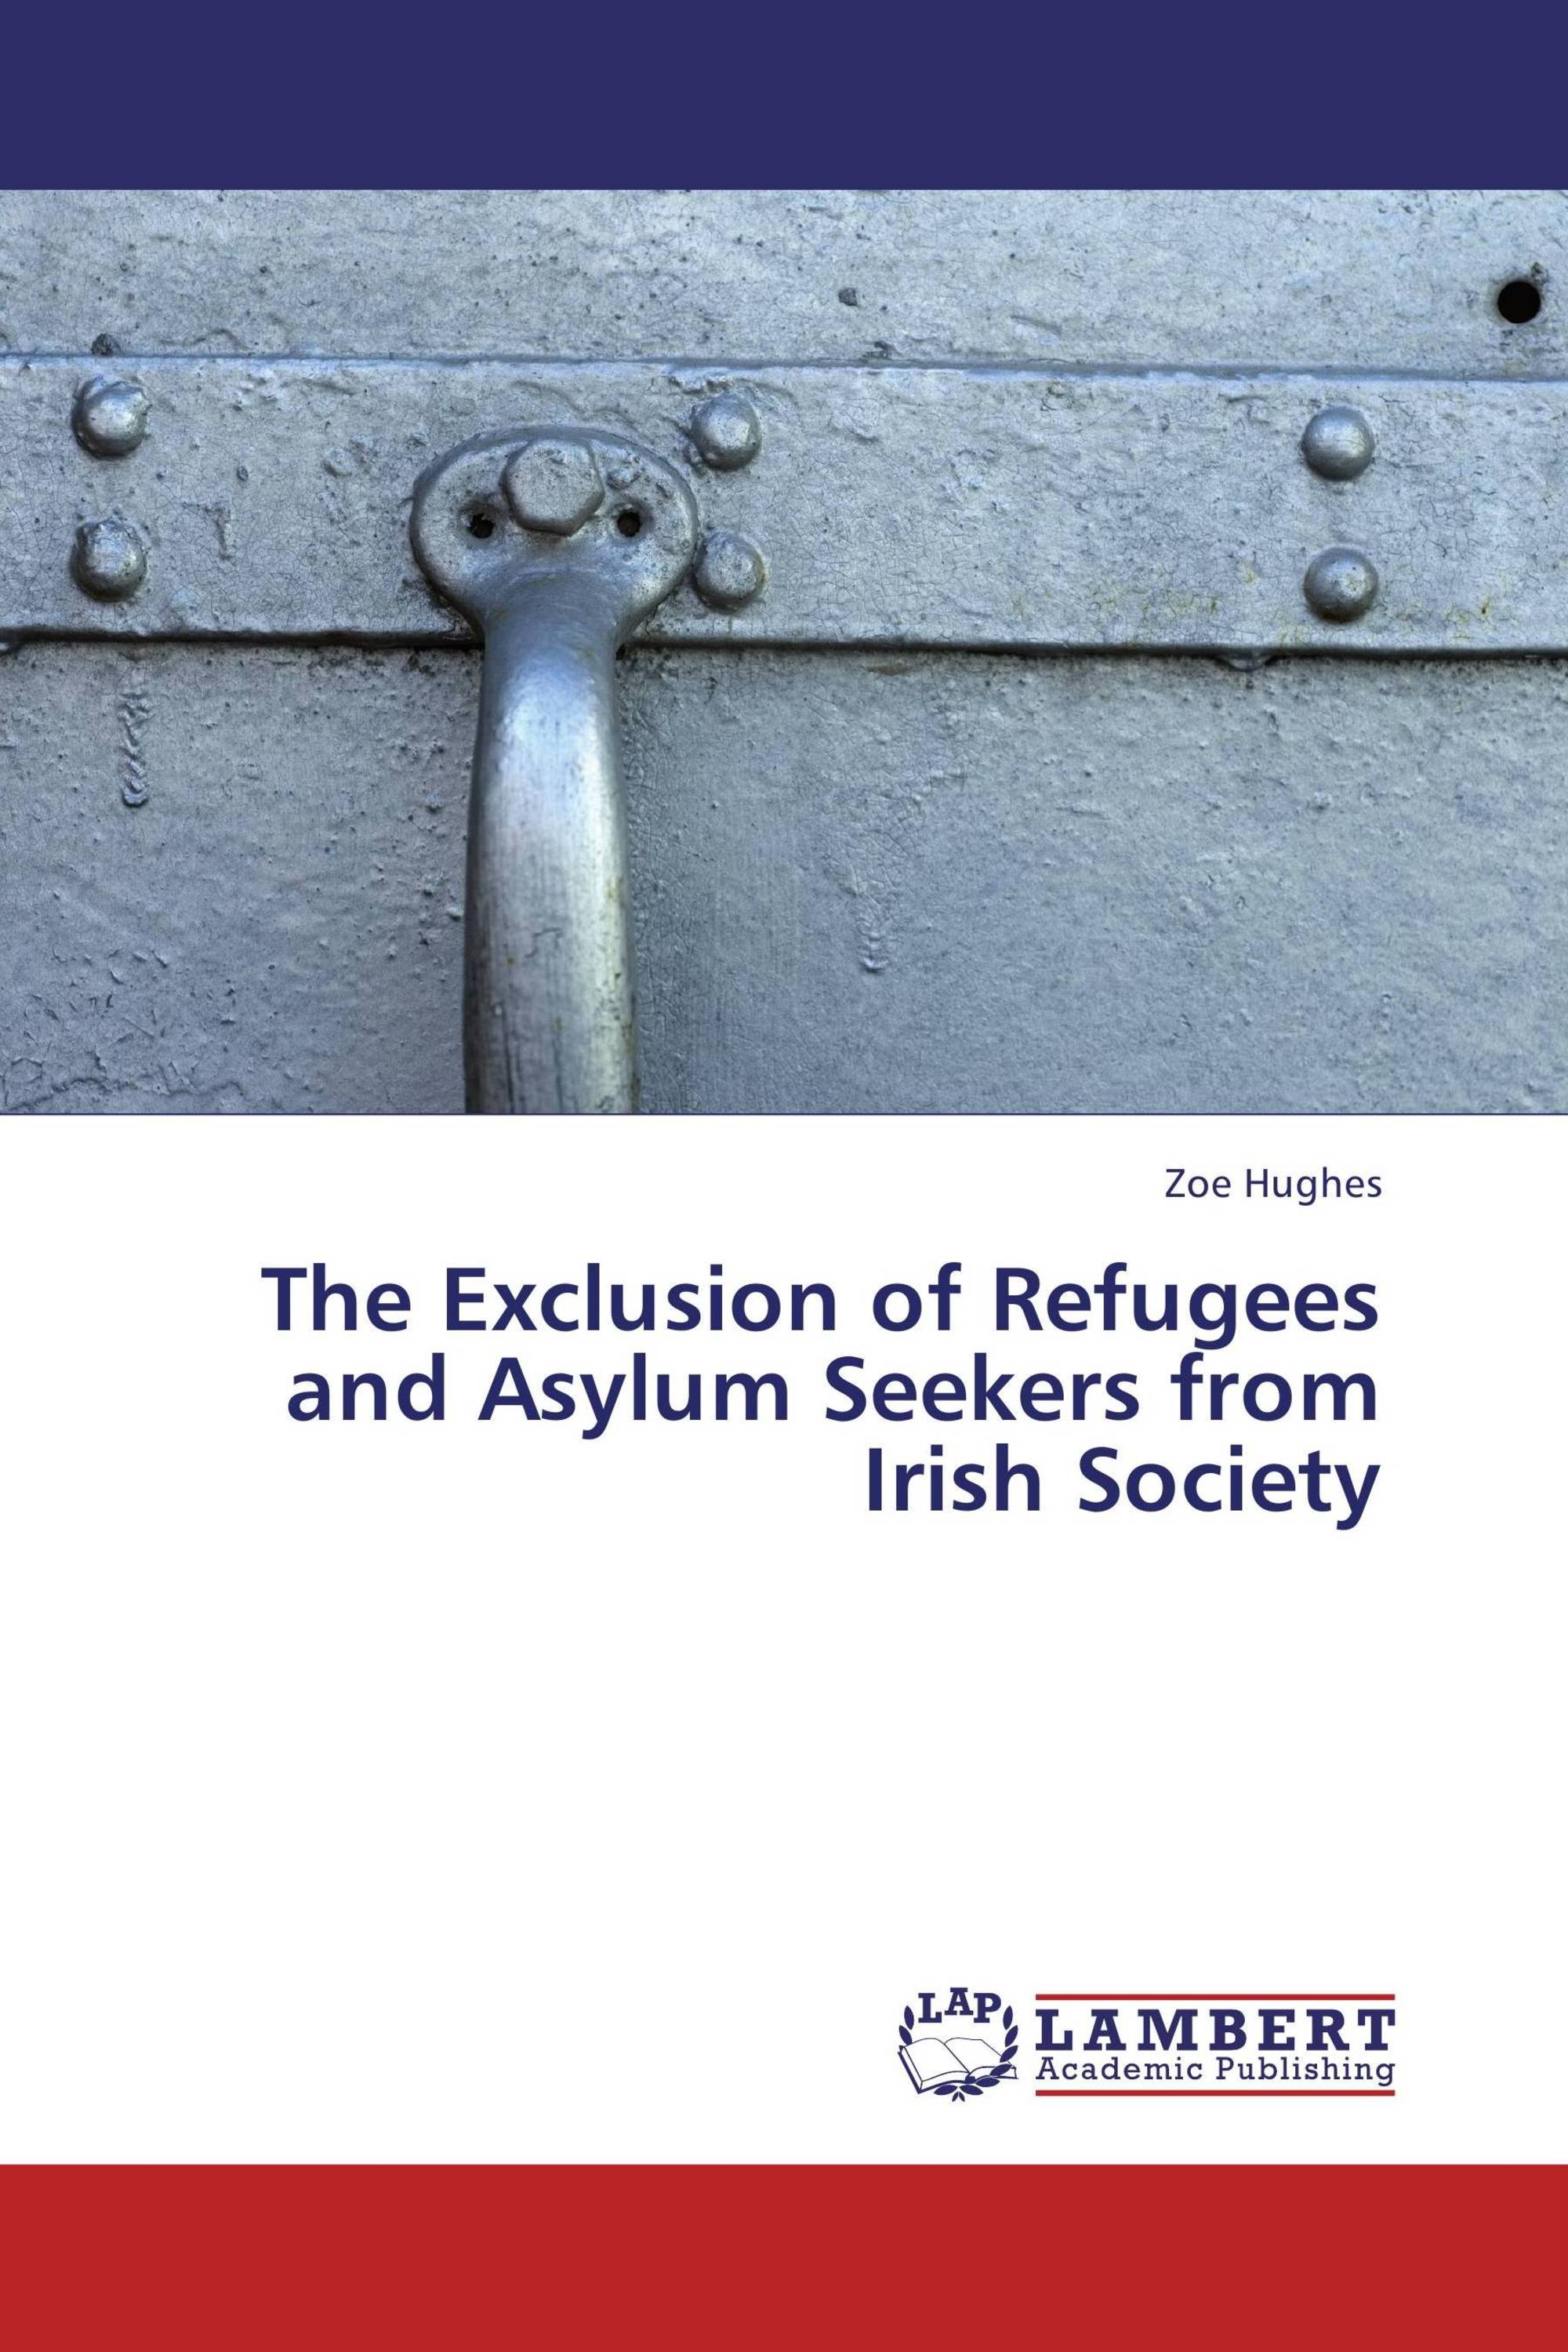 The Exclusion of Refugees and Asylum Seekers  from Irish Society